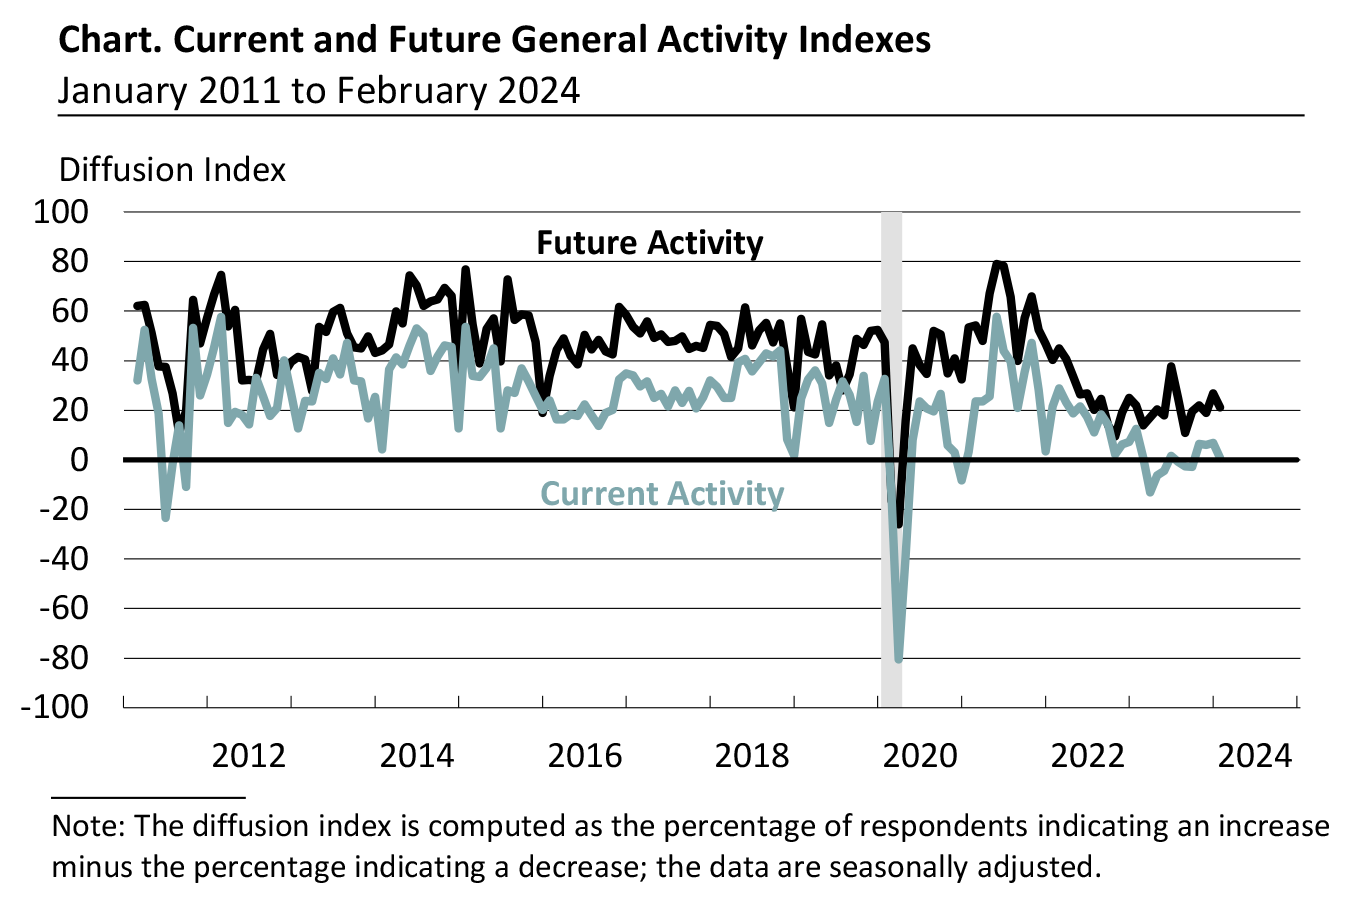 Current and Future General Activity Indexes for Firms